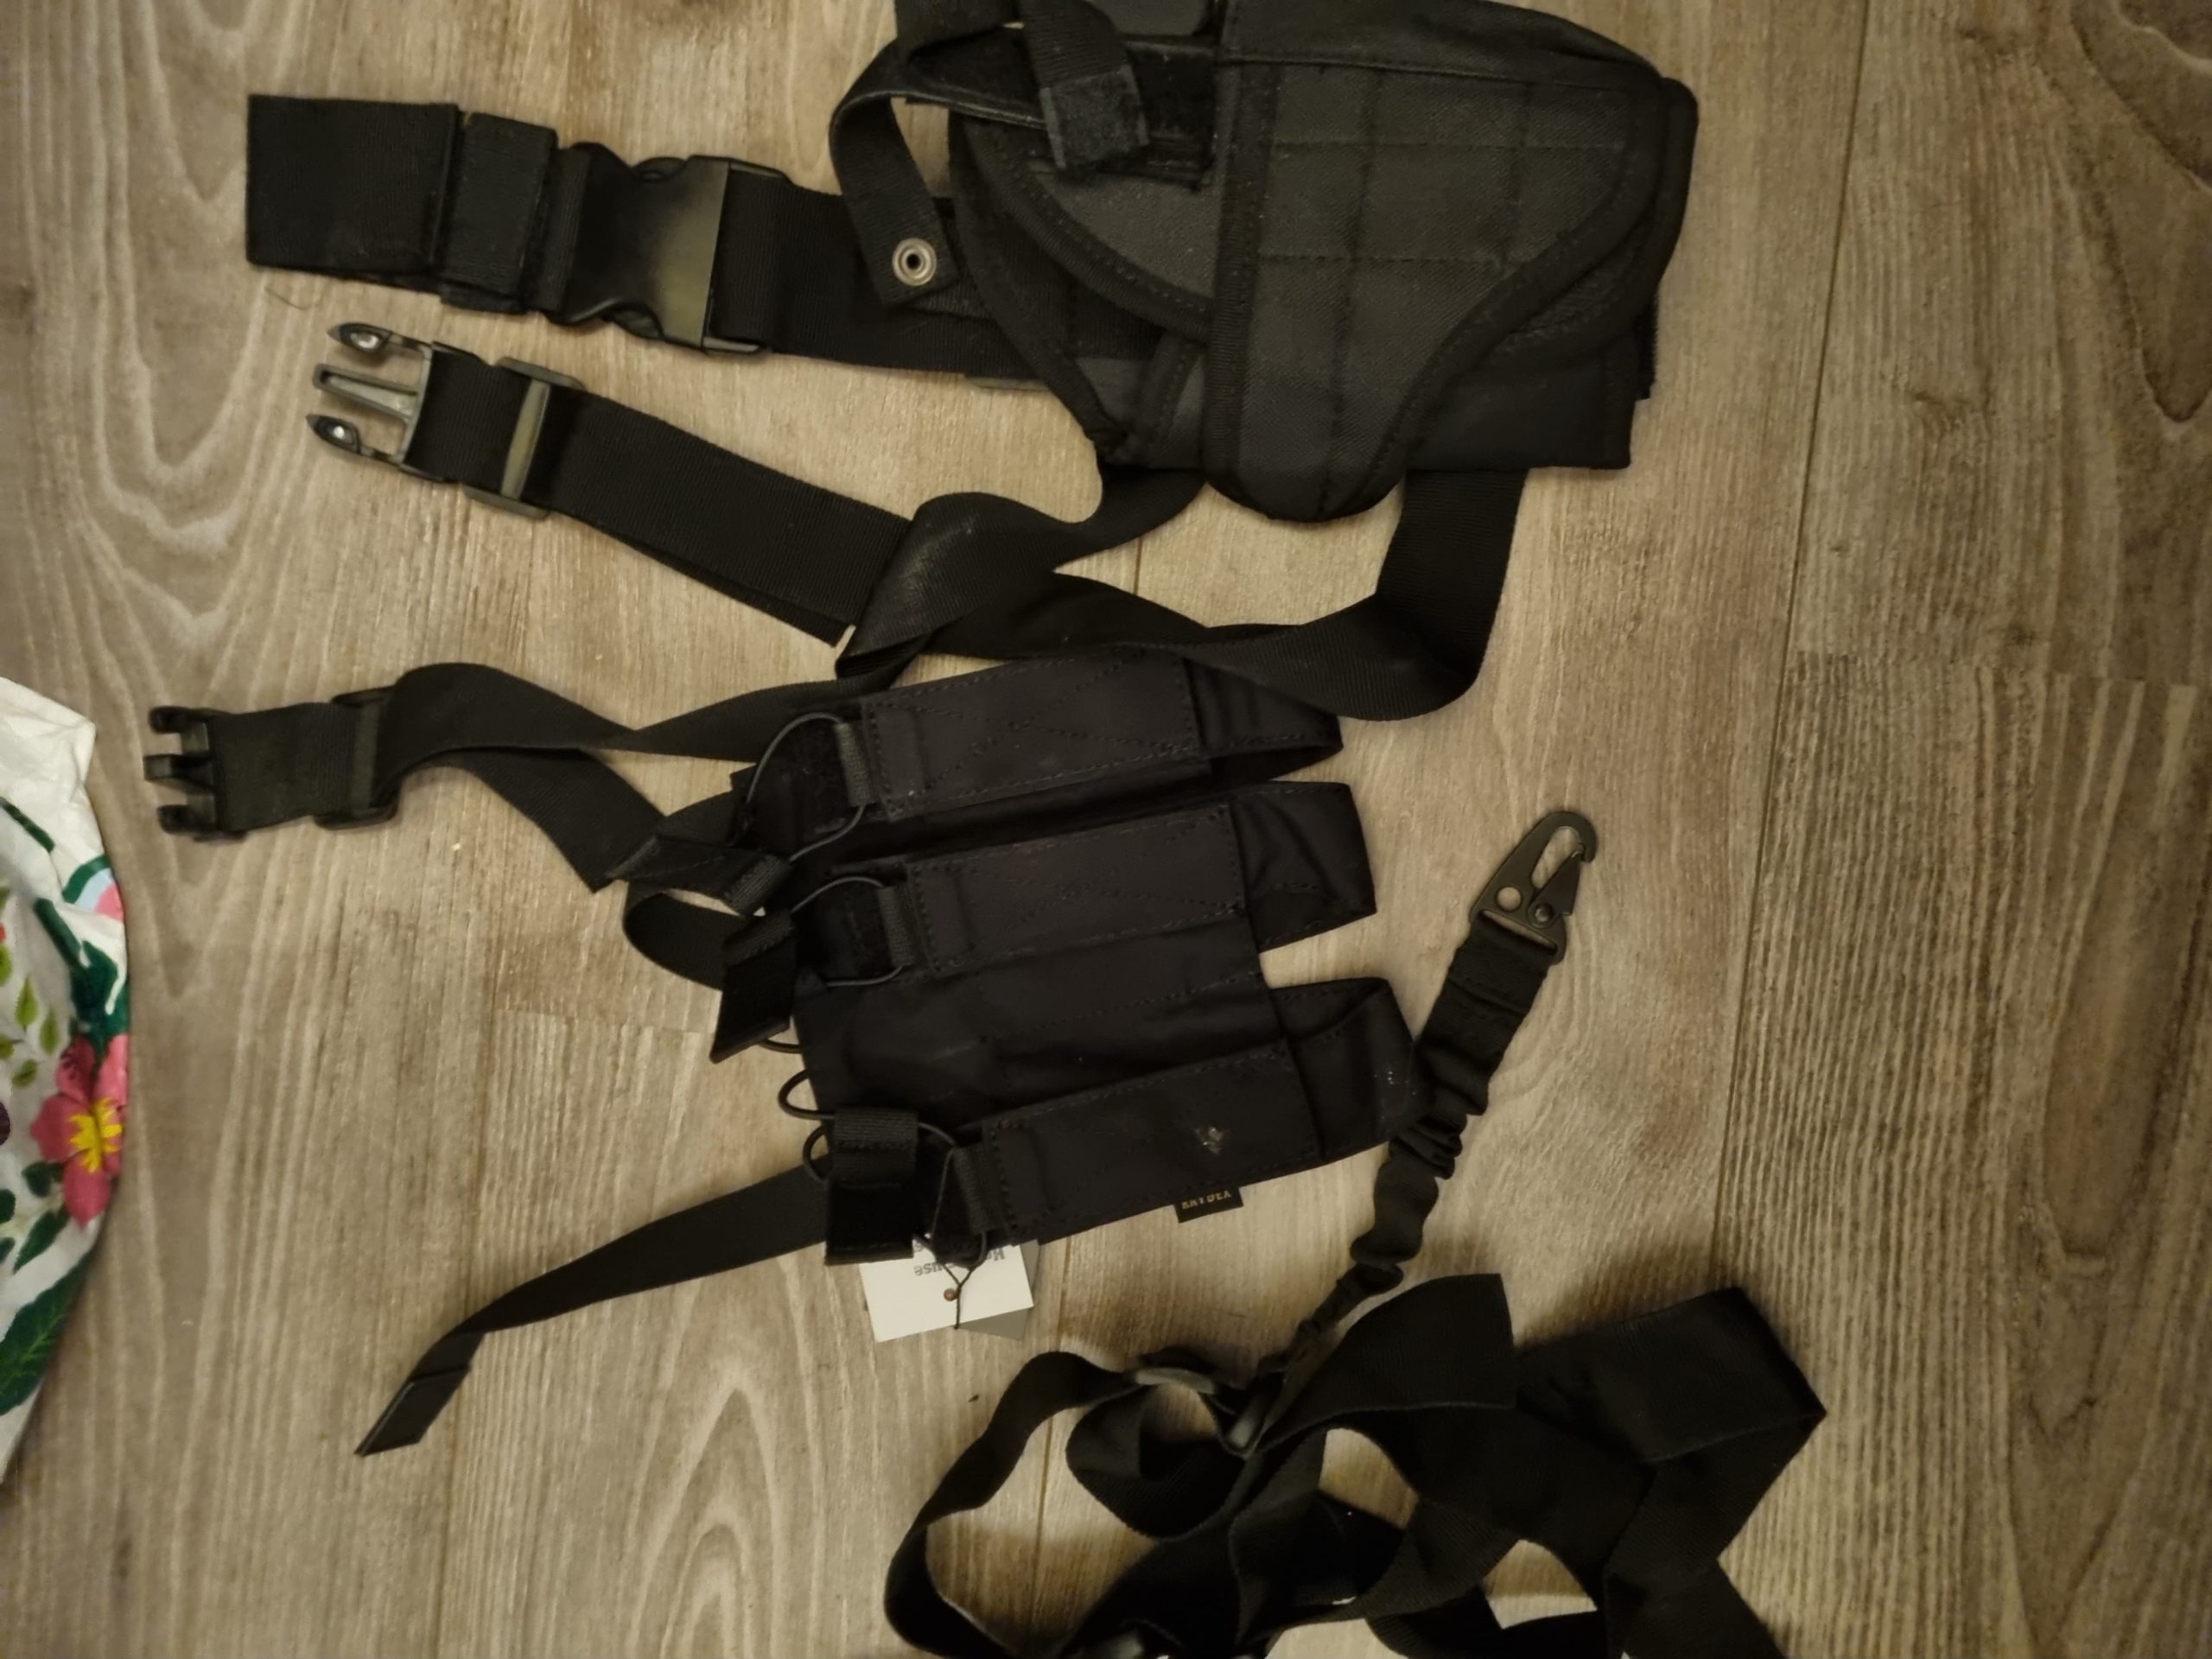 Diverse 4 (holsters black)